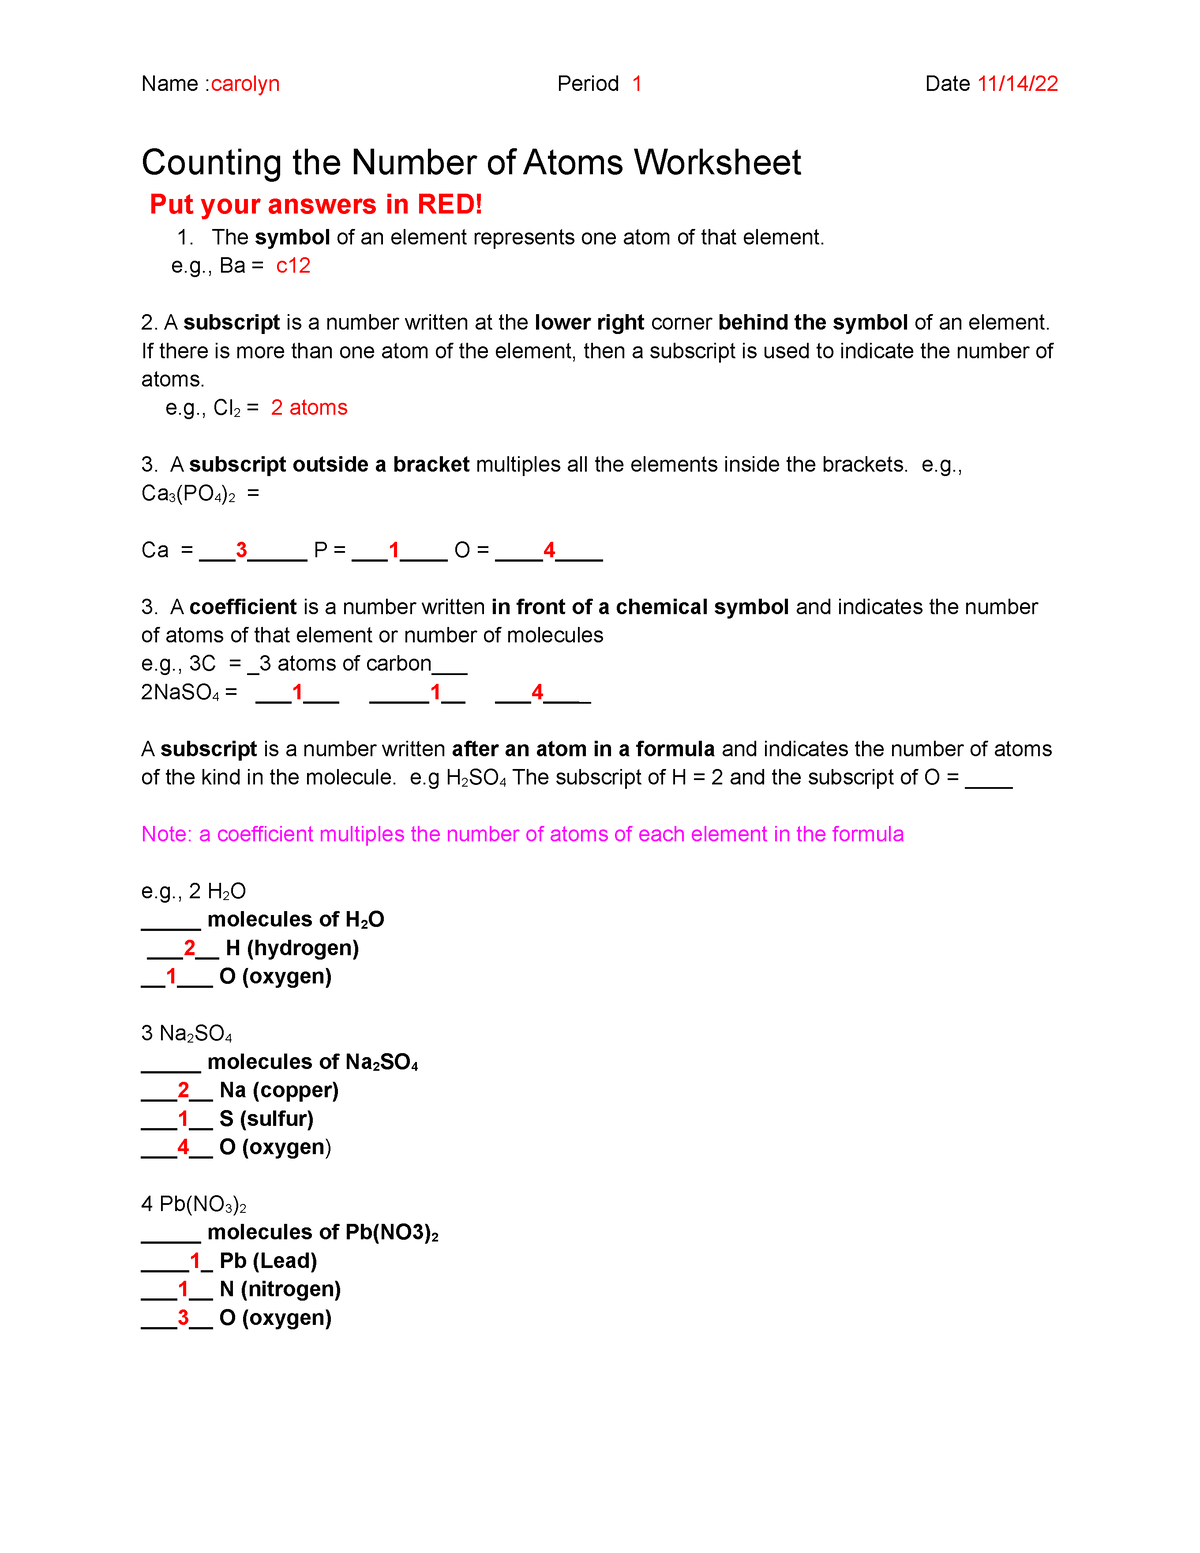 counting-the-number-of-atoms-worksheet-updated-name-carolyn-period-1